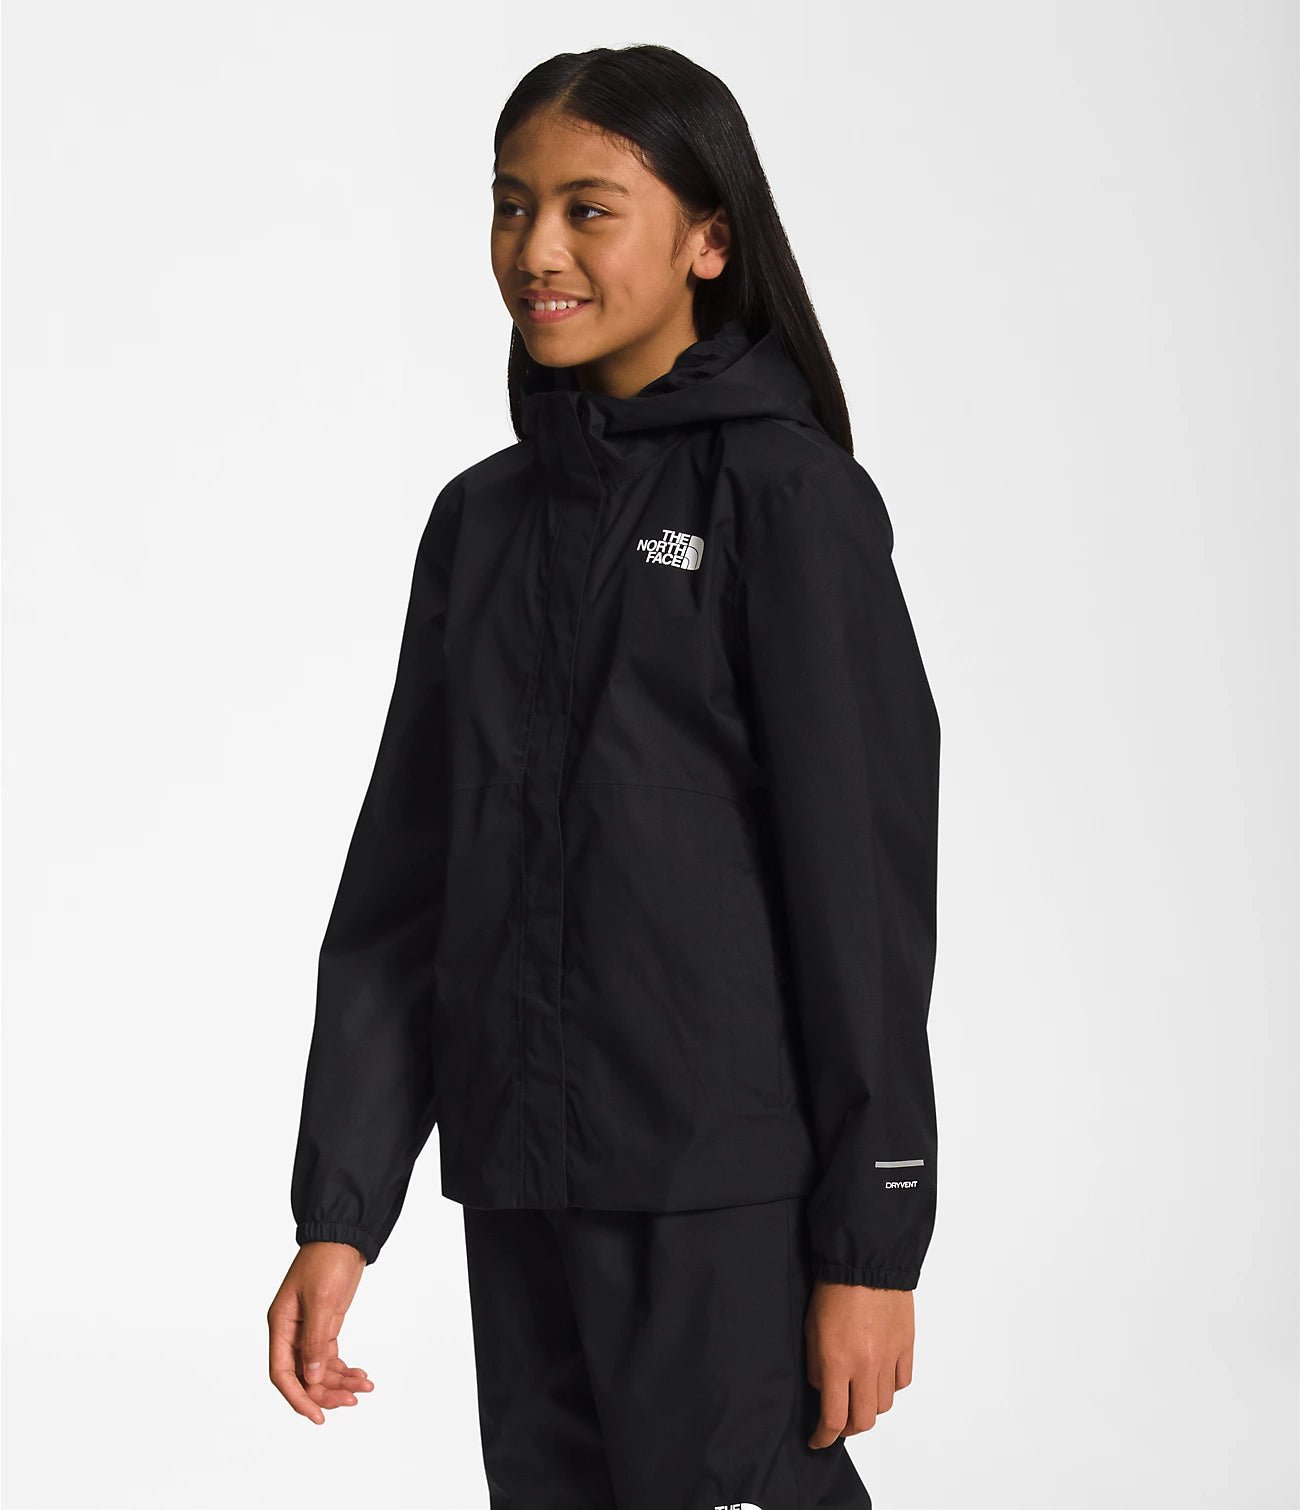 Side View of a Smiling girl wearing Black The North Face Girls' Warm Storm Jacket - Mountain Kids Outfitters: Stylish and Weather-Ready Outerwear